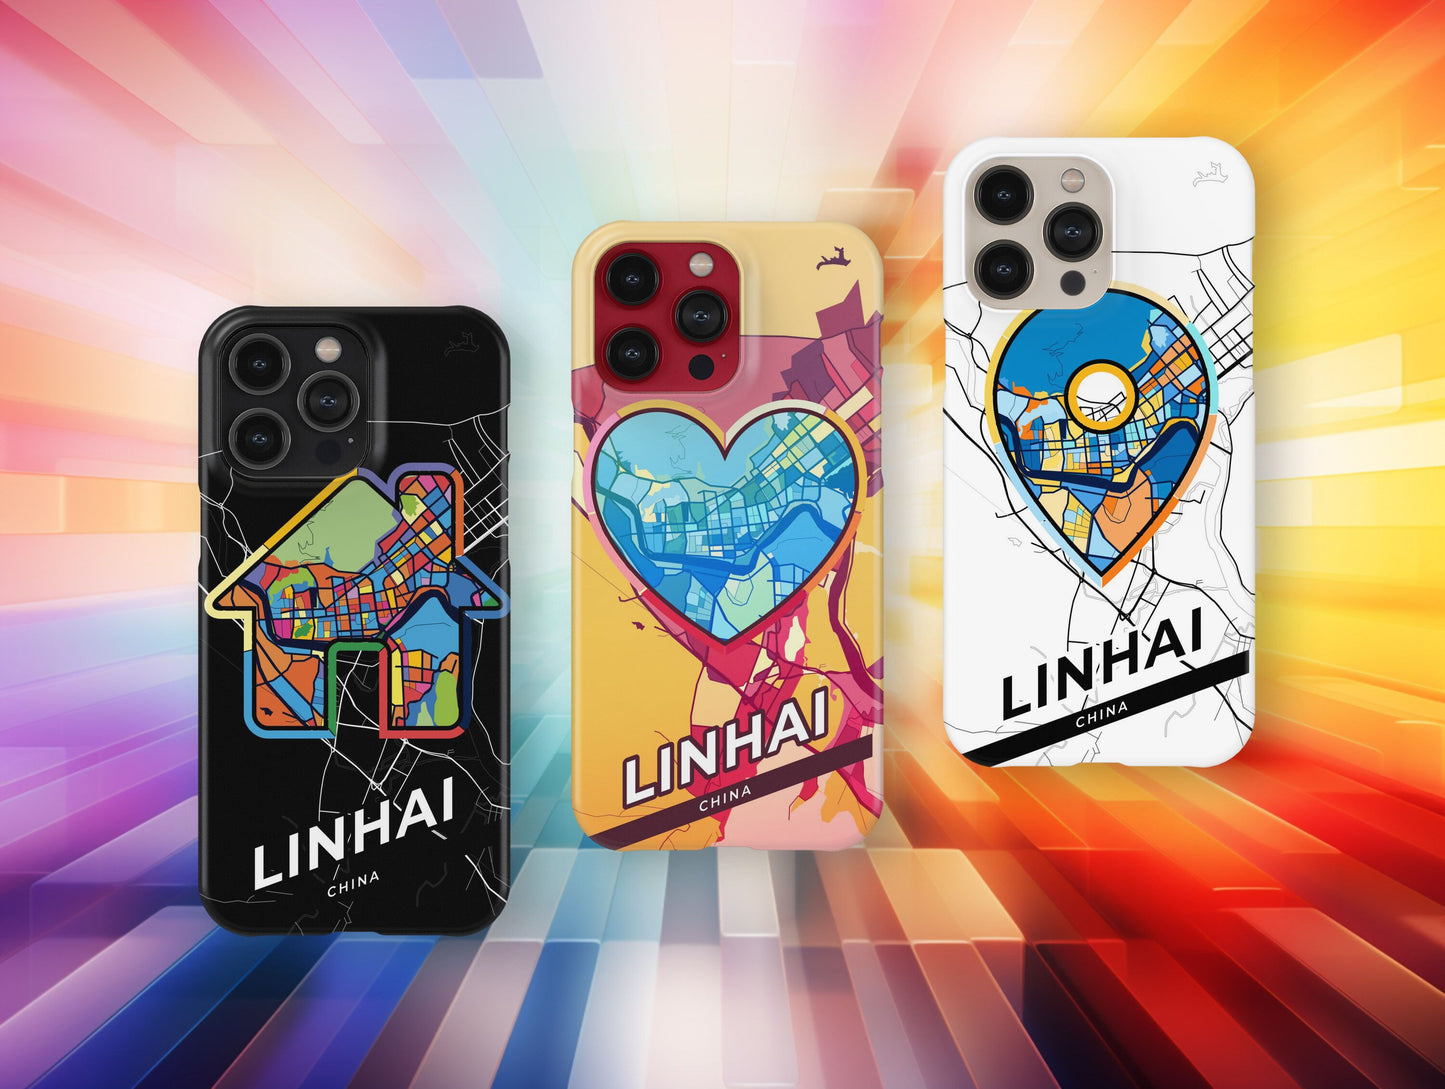 Linhai China slim phone case with colorful icon. Birthday, wedding or housewarming gift. Couple match cases.